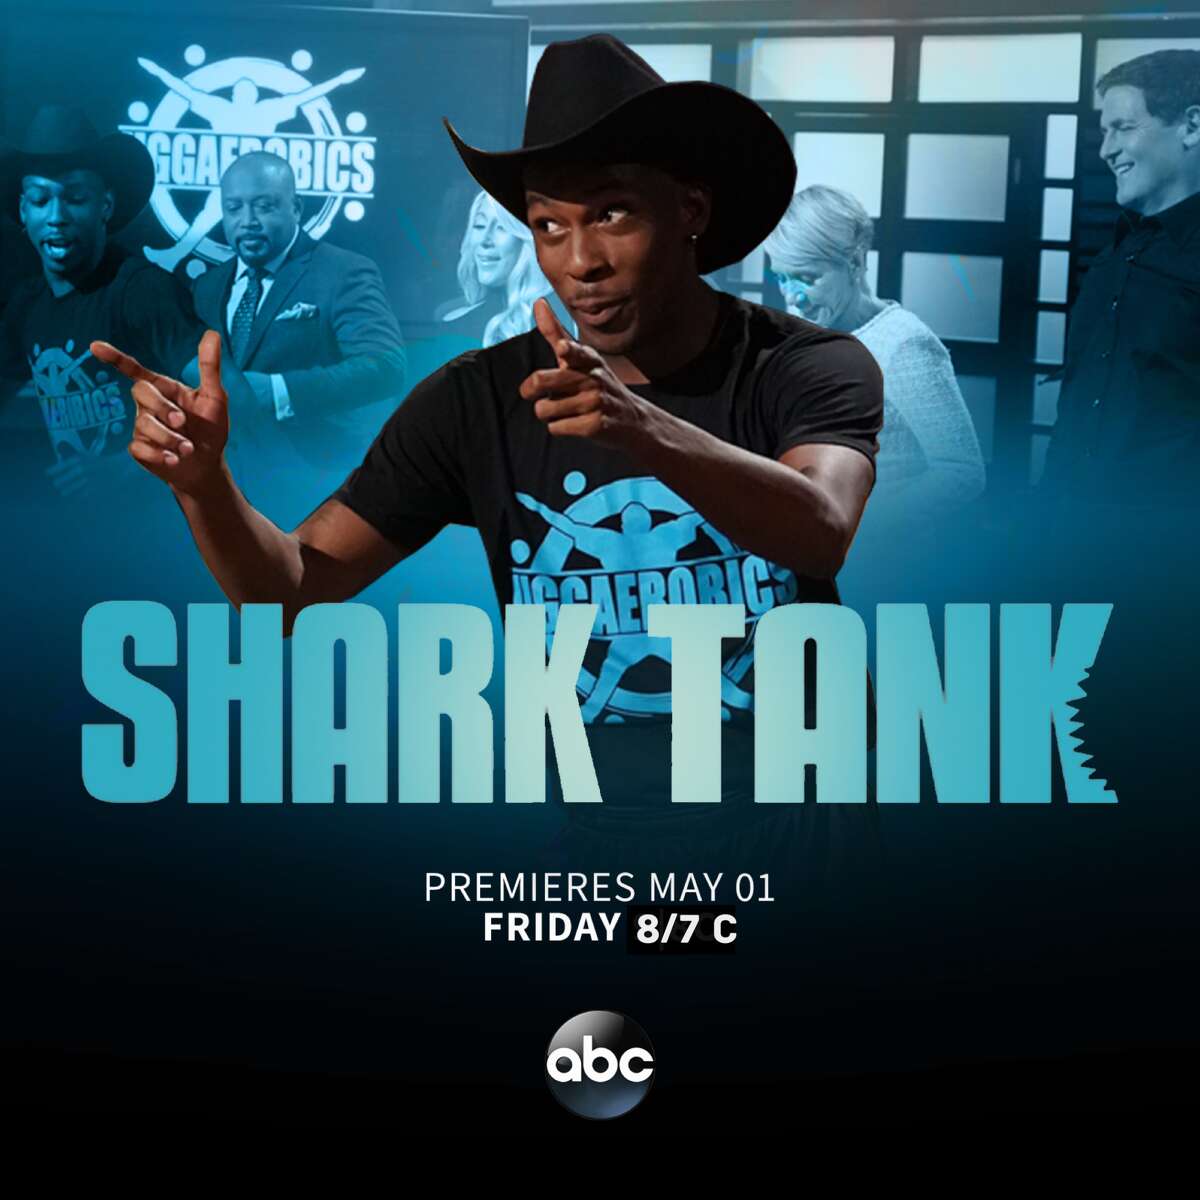 Founder of JiggAerobics, LaDonte Lotts, will be featured on tonights episode of Shark Tank on ABC at 7 p.m.